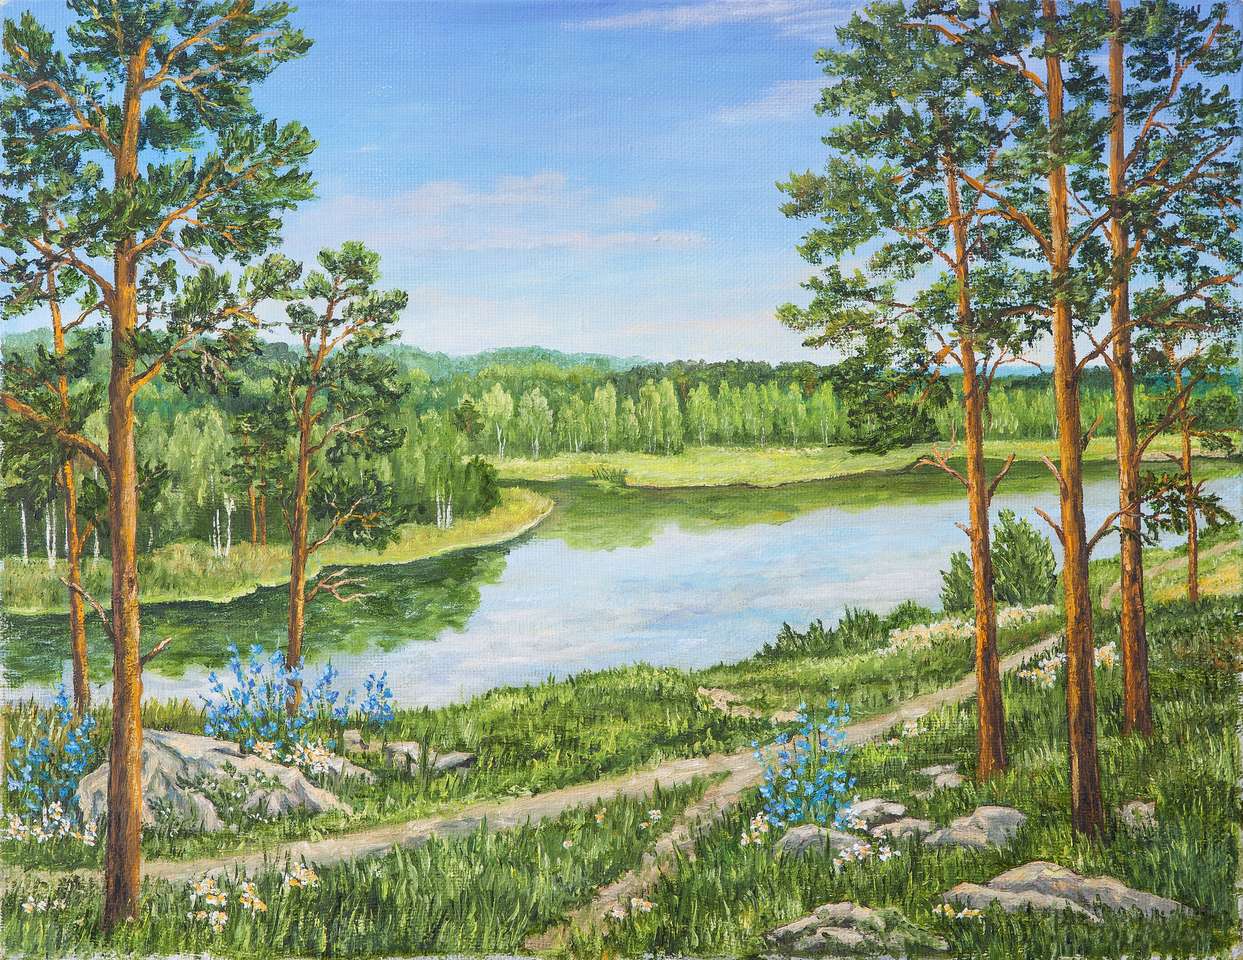 Green forest near river jigsaw puzzle online